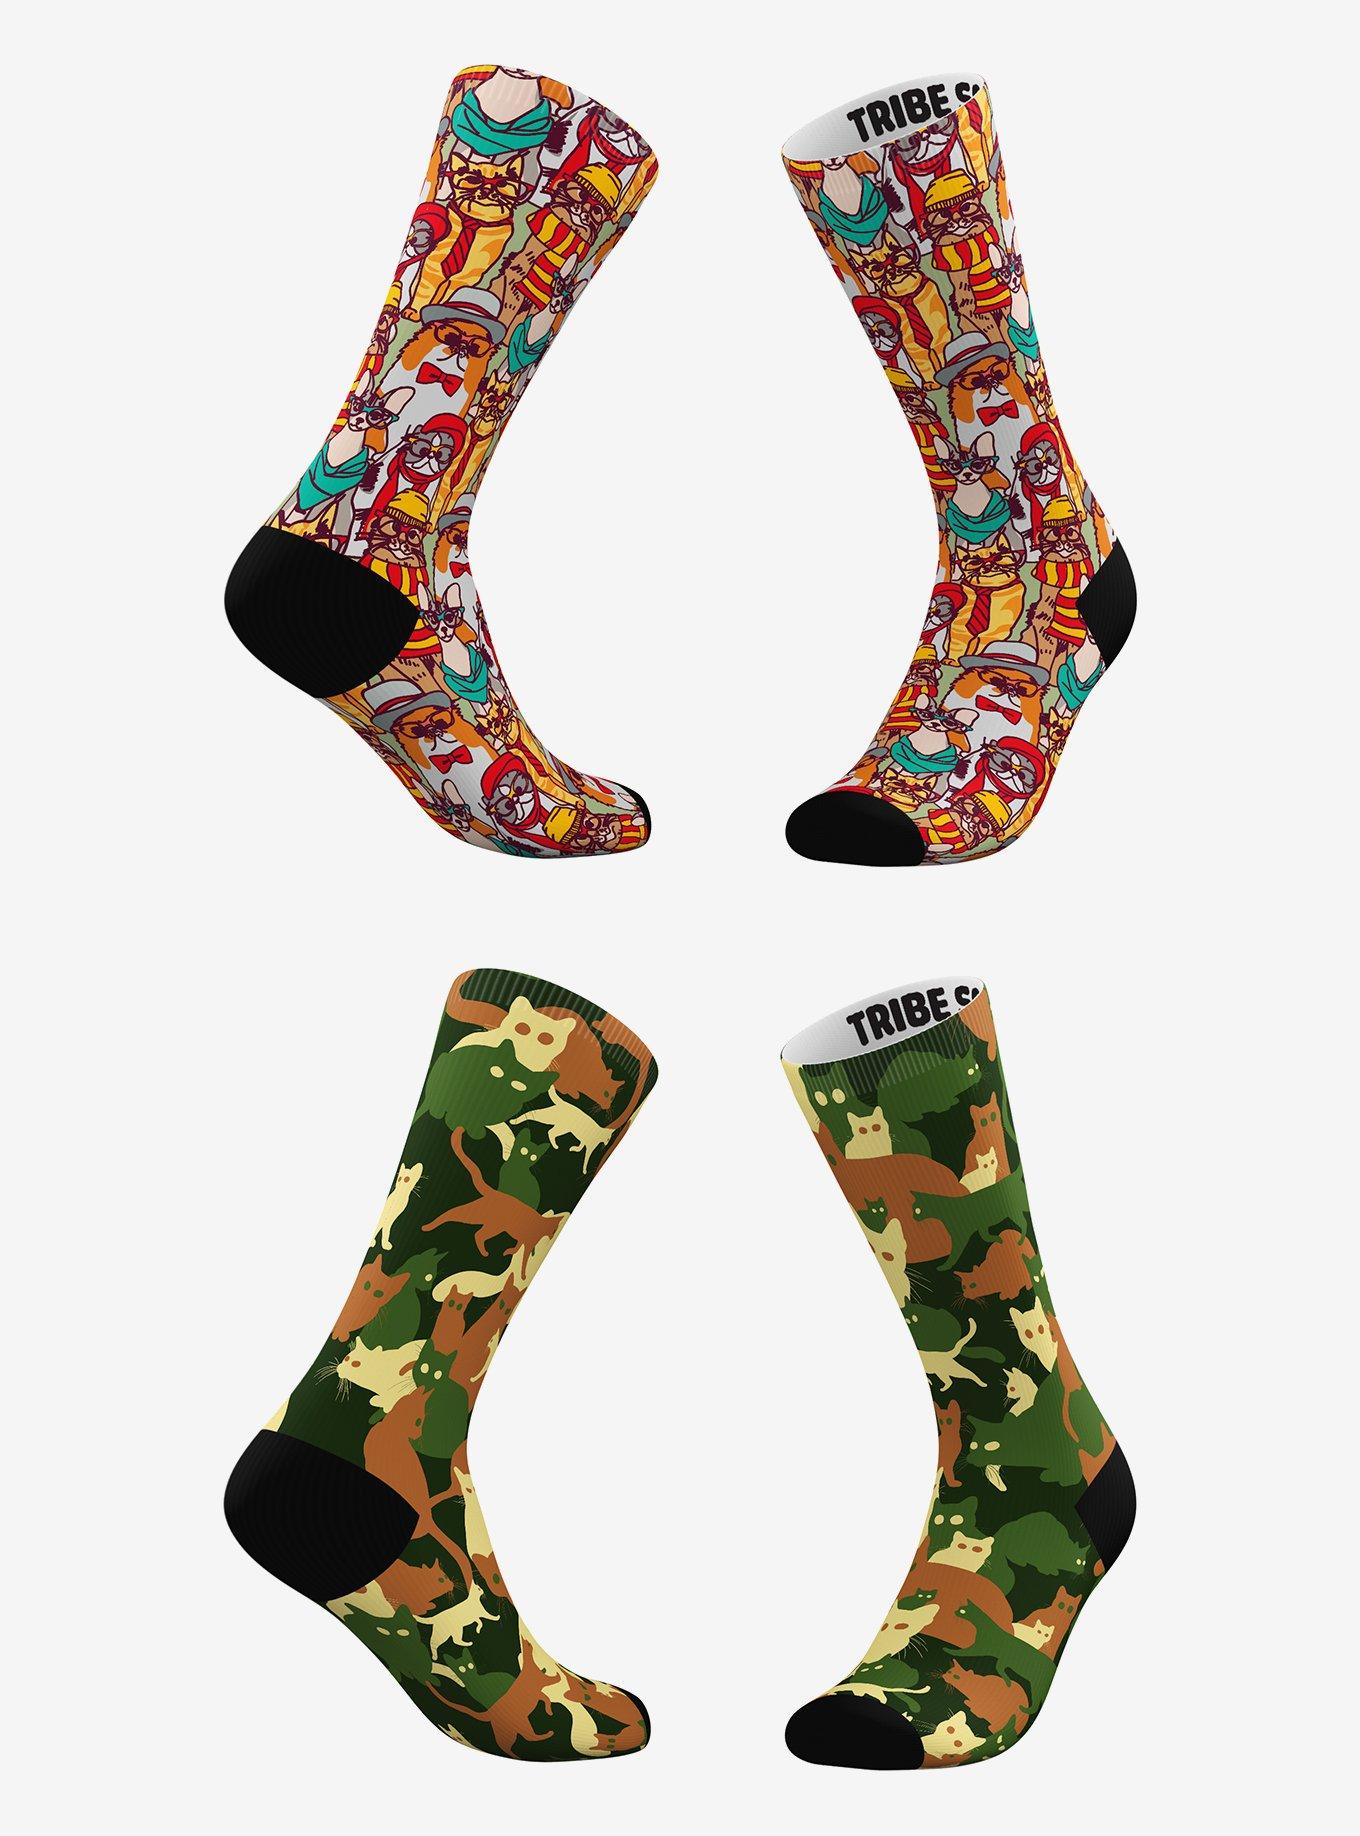 Hipster Cat and Classic Camo Cat Socks 2 Pairs